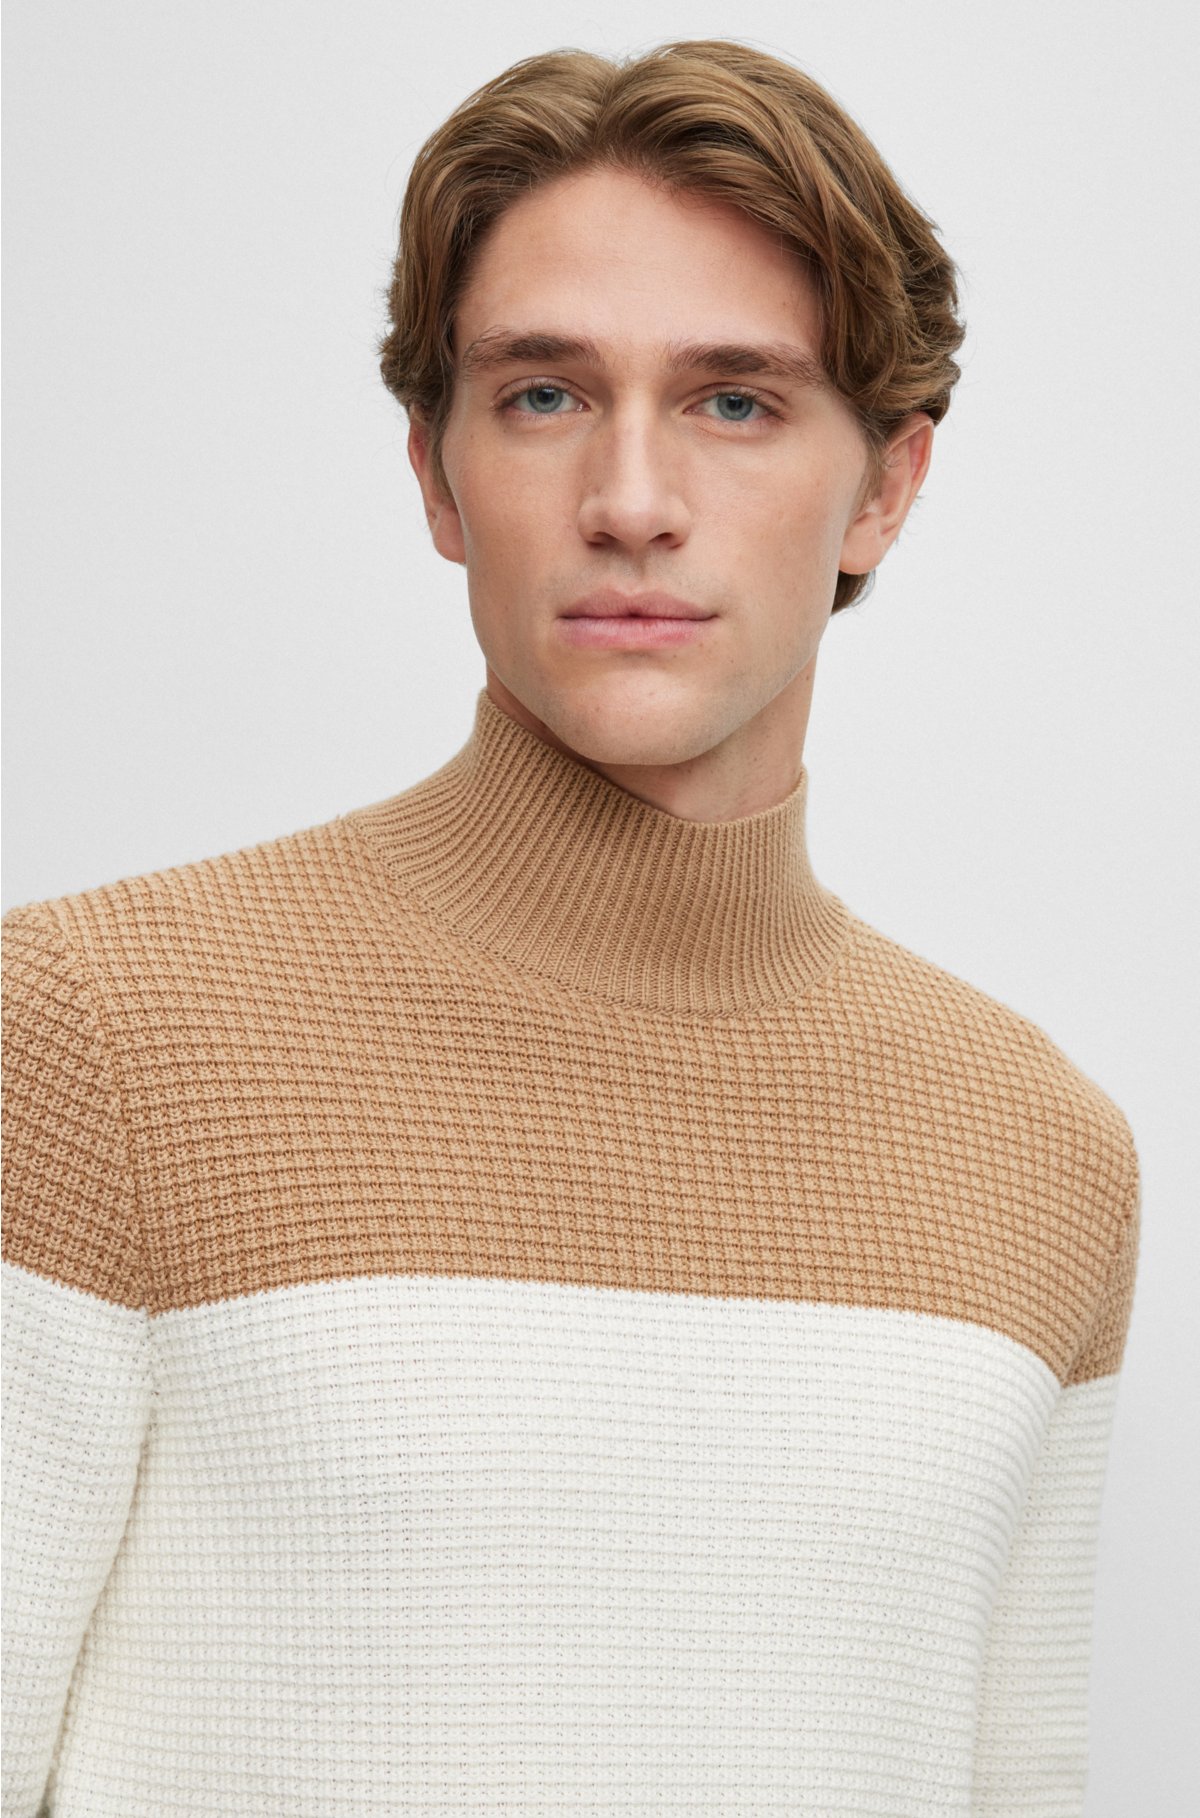 Mock-neck sweater in structured cotton and virgin wool, Black  /  White  /  Beige